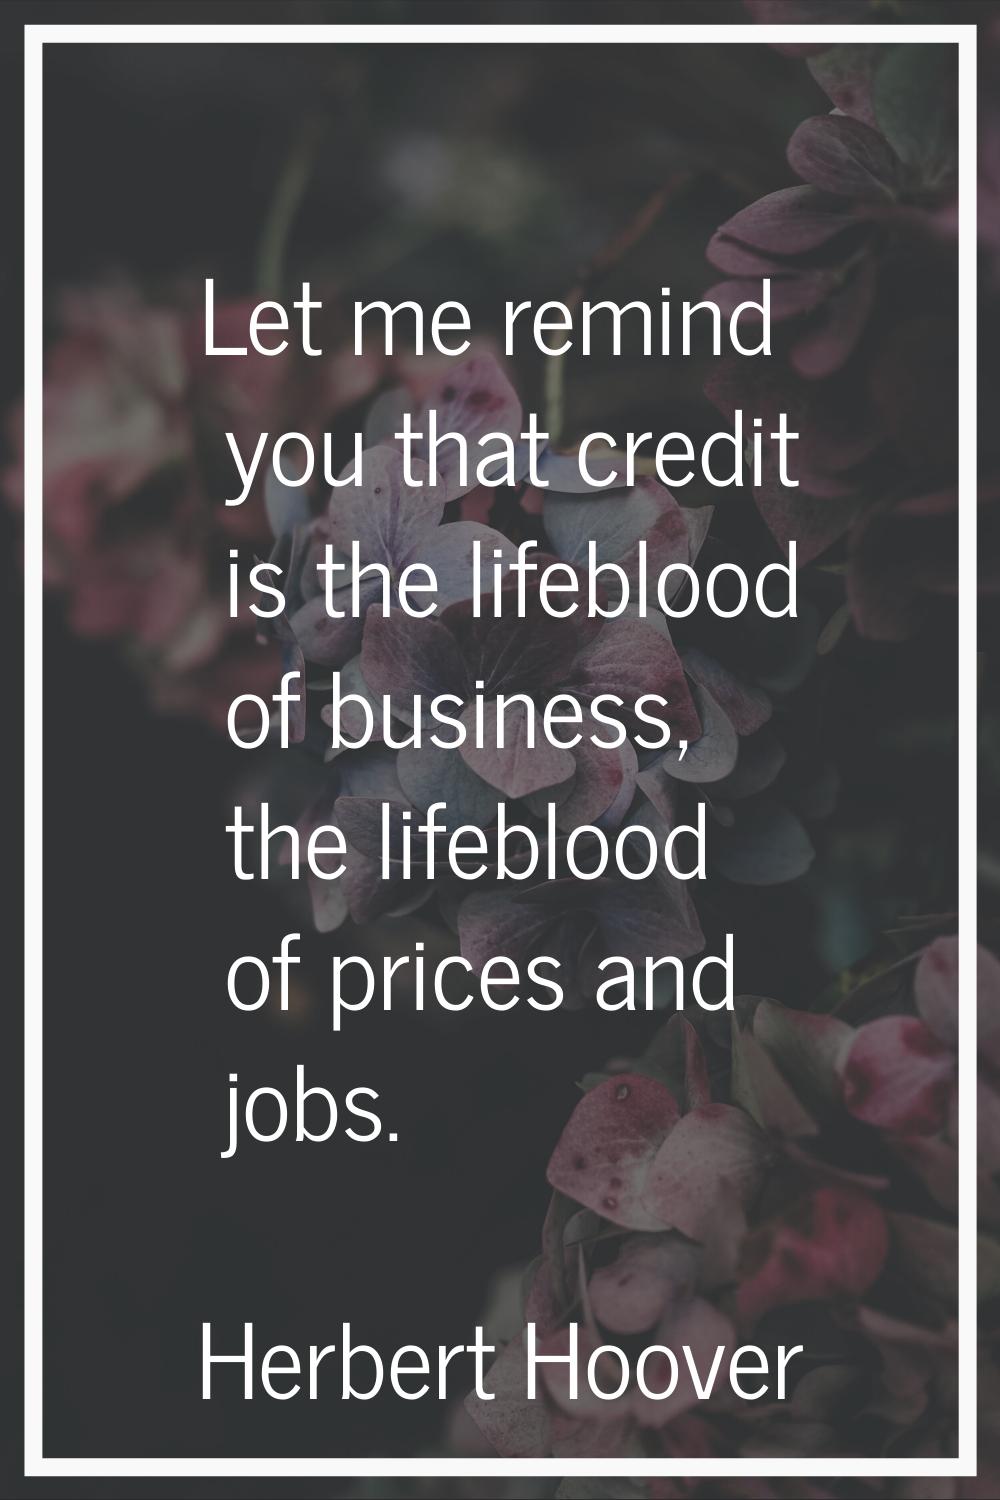 Let me remind you that credit is the lifeblood of business, the lifeblood of prices and jobs.